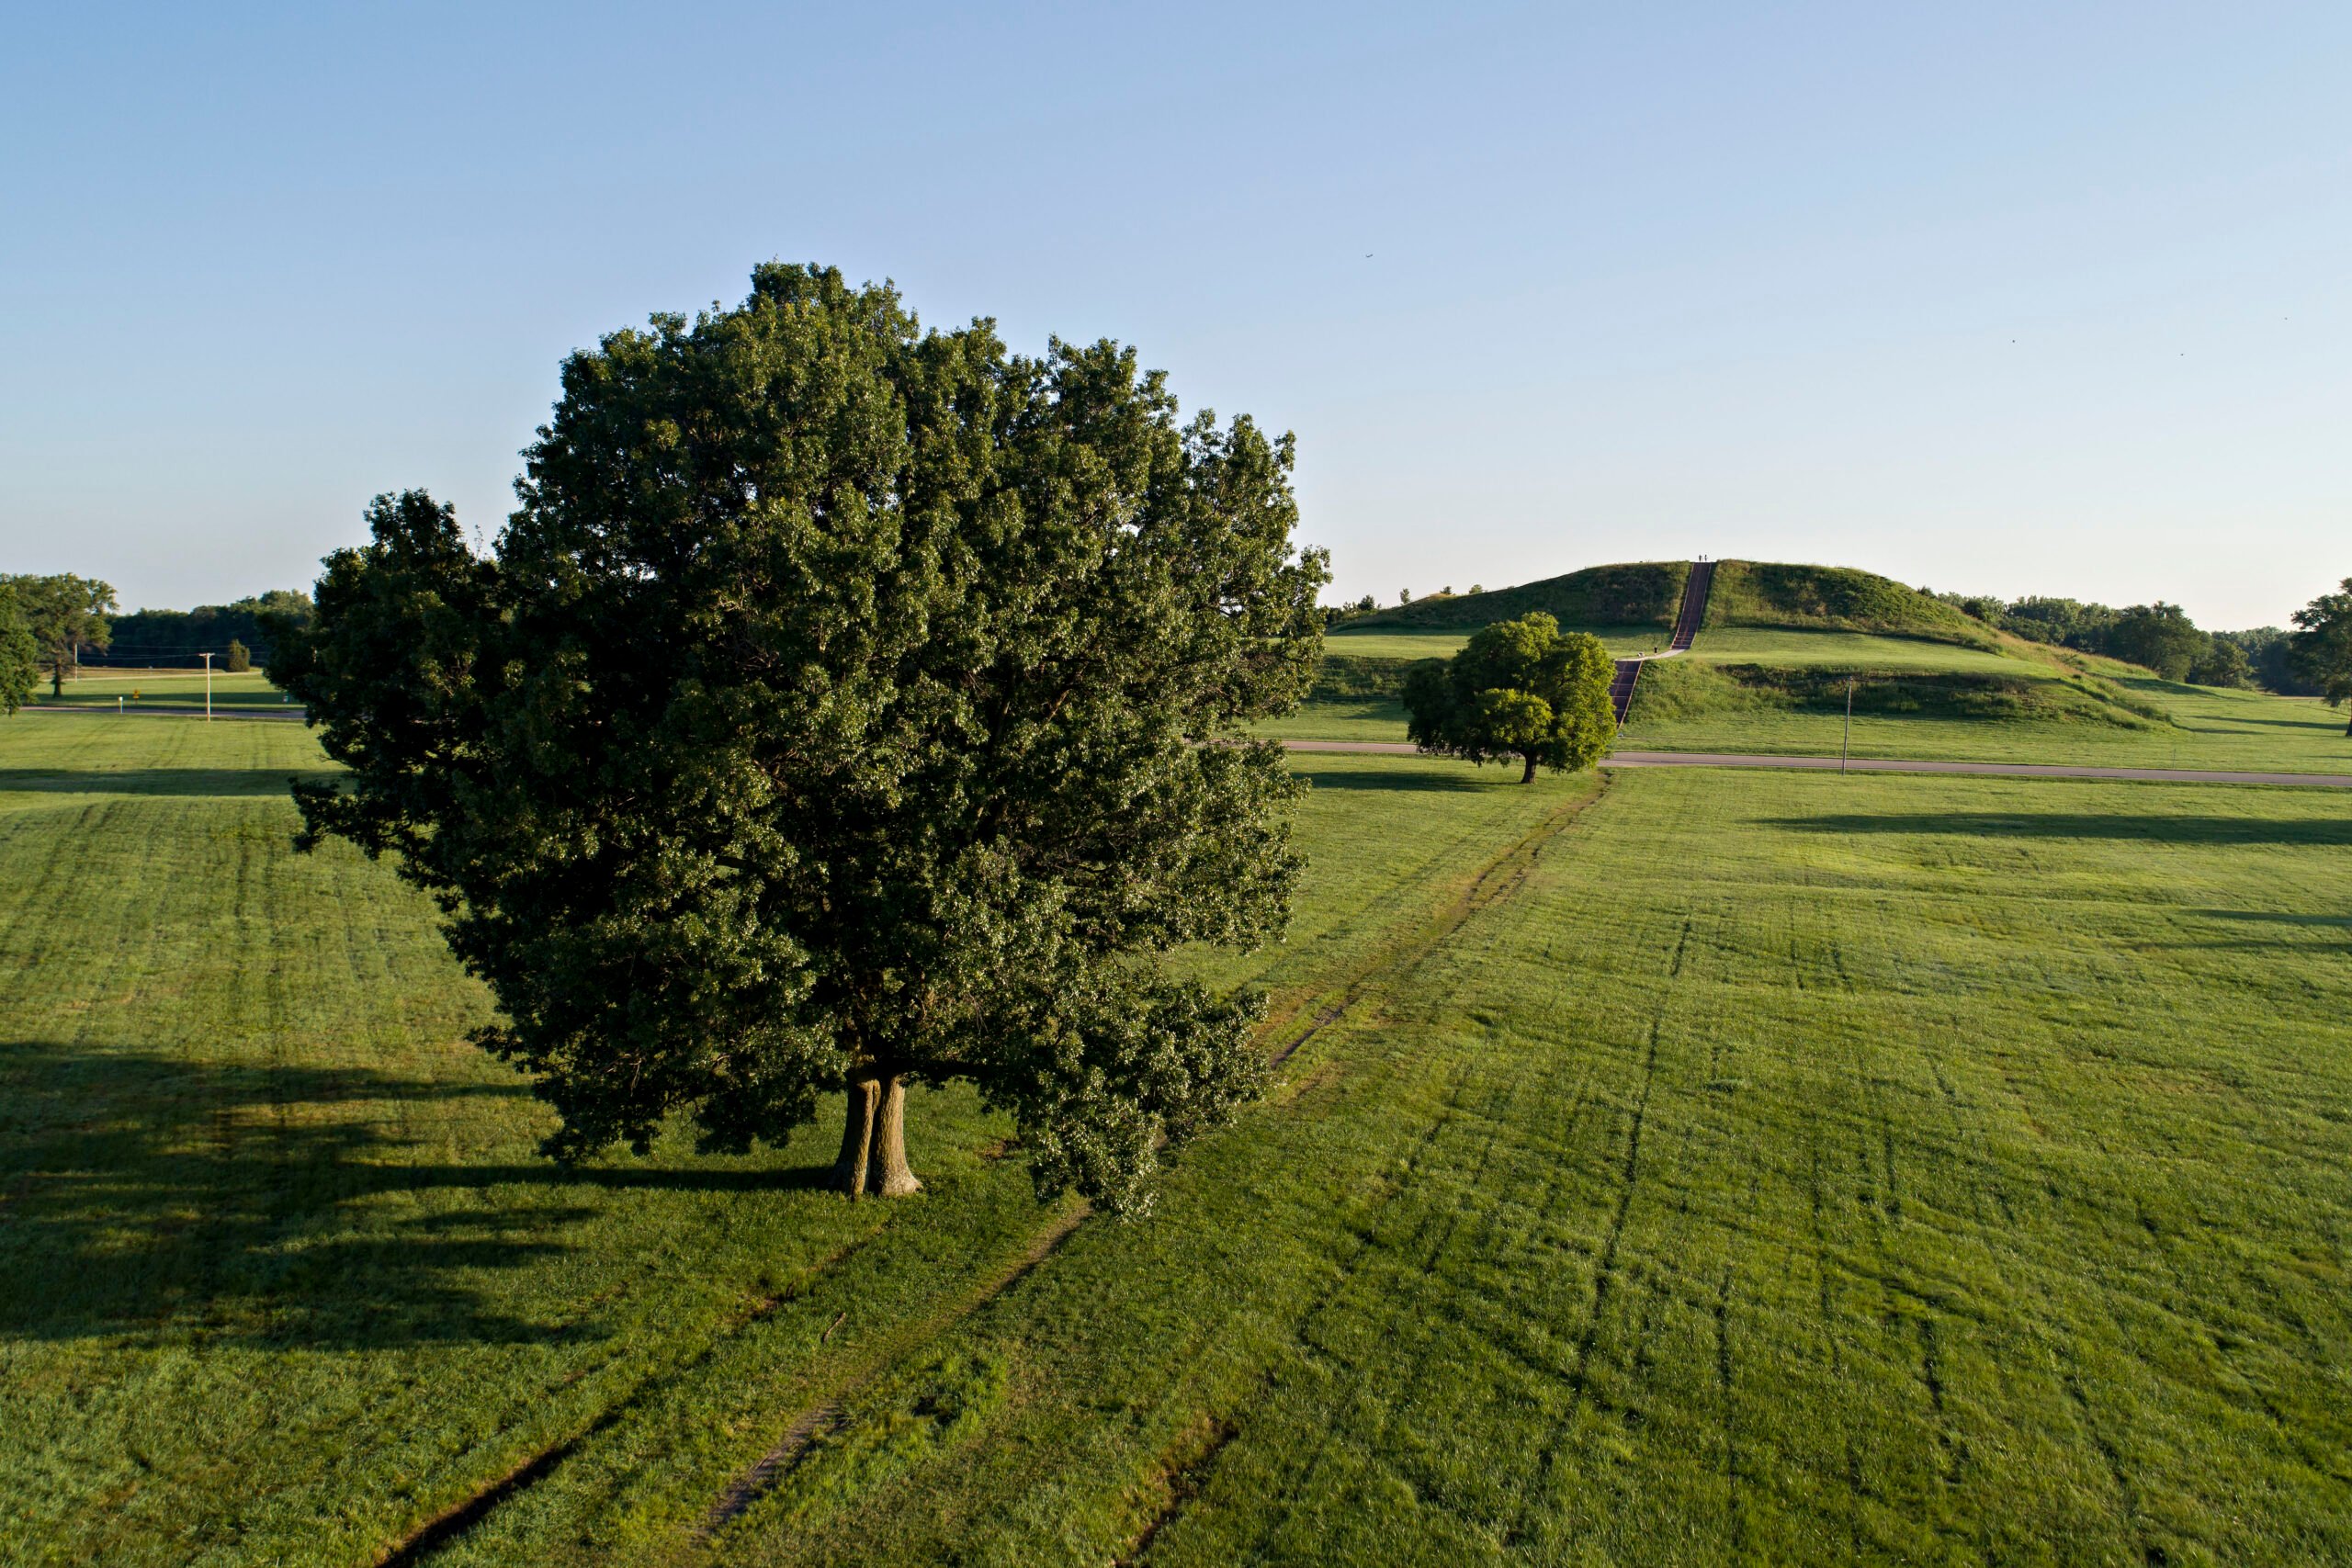 Daniel Acker captures acres of green ground and the footpath leading to the Cahokia mounds